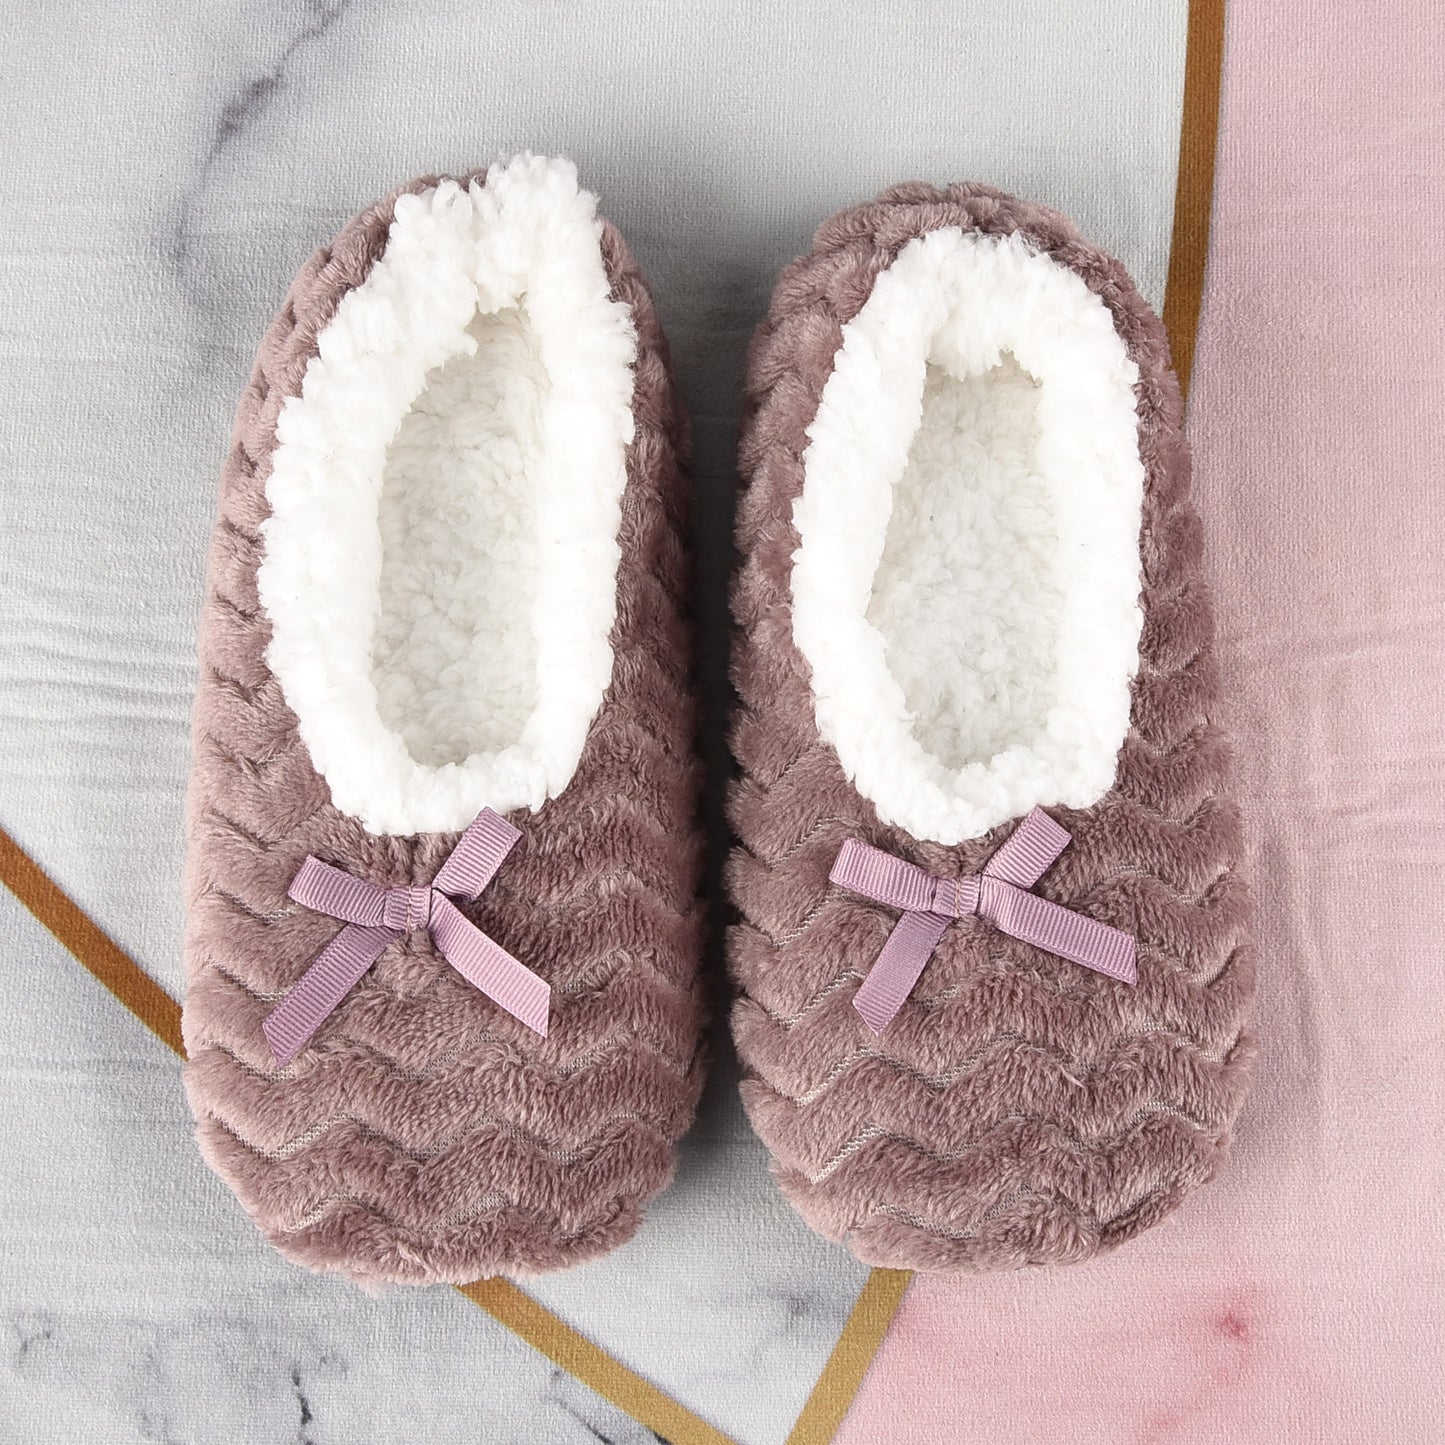 Warm Winter Wool Slippers Indoor Soft Plush Non-slip House Slippers Shoes For Women